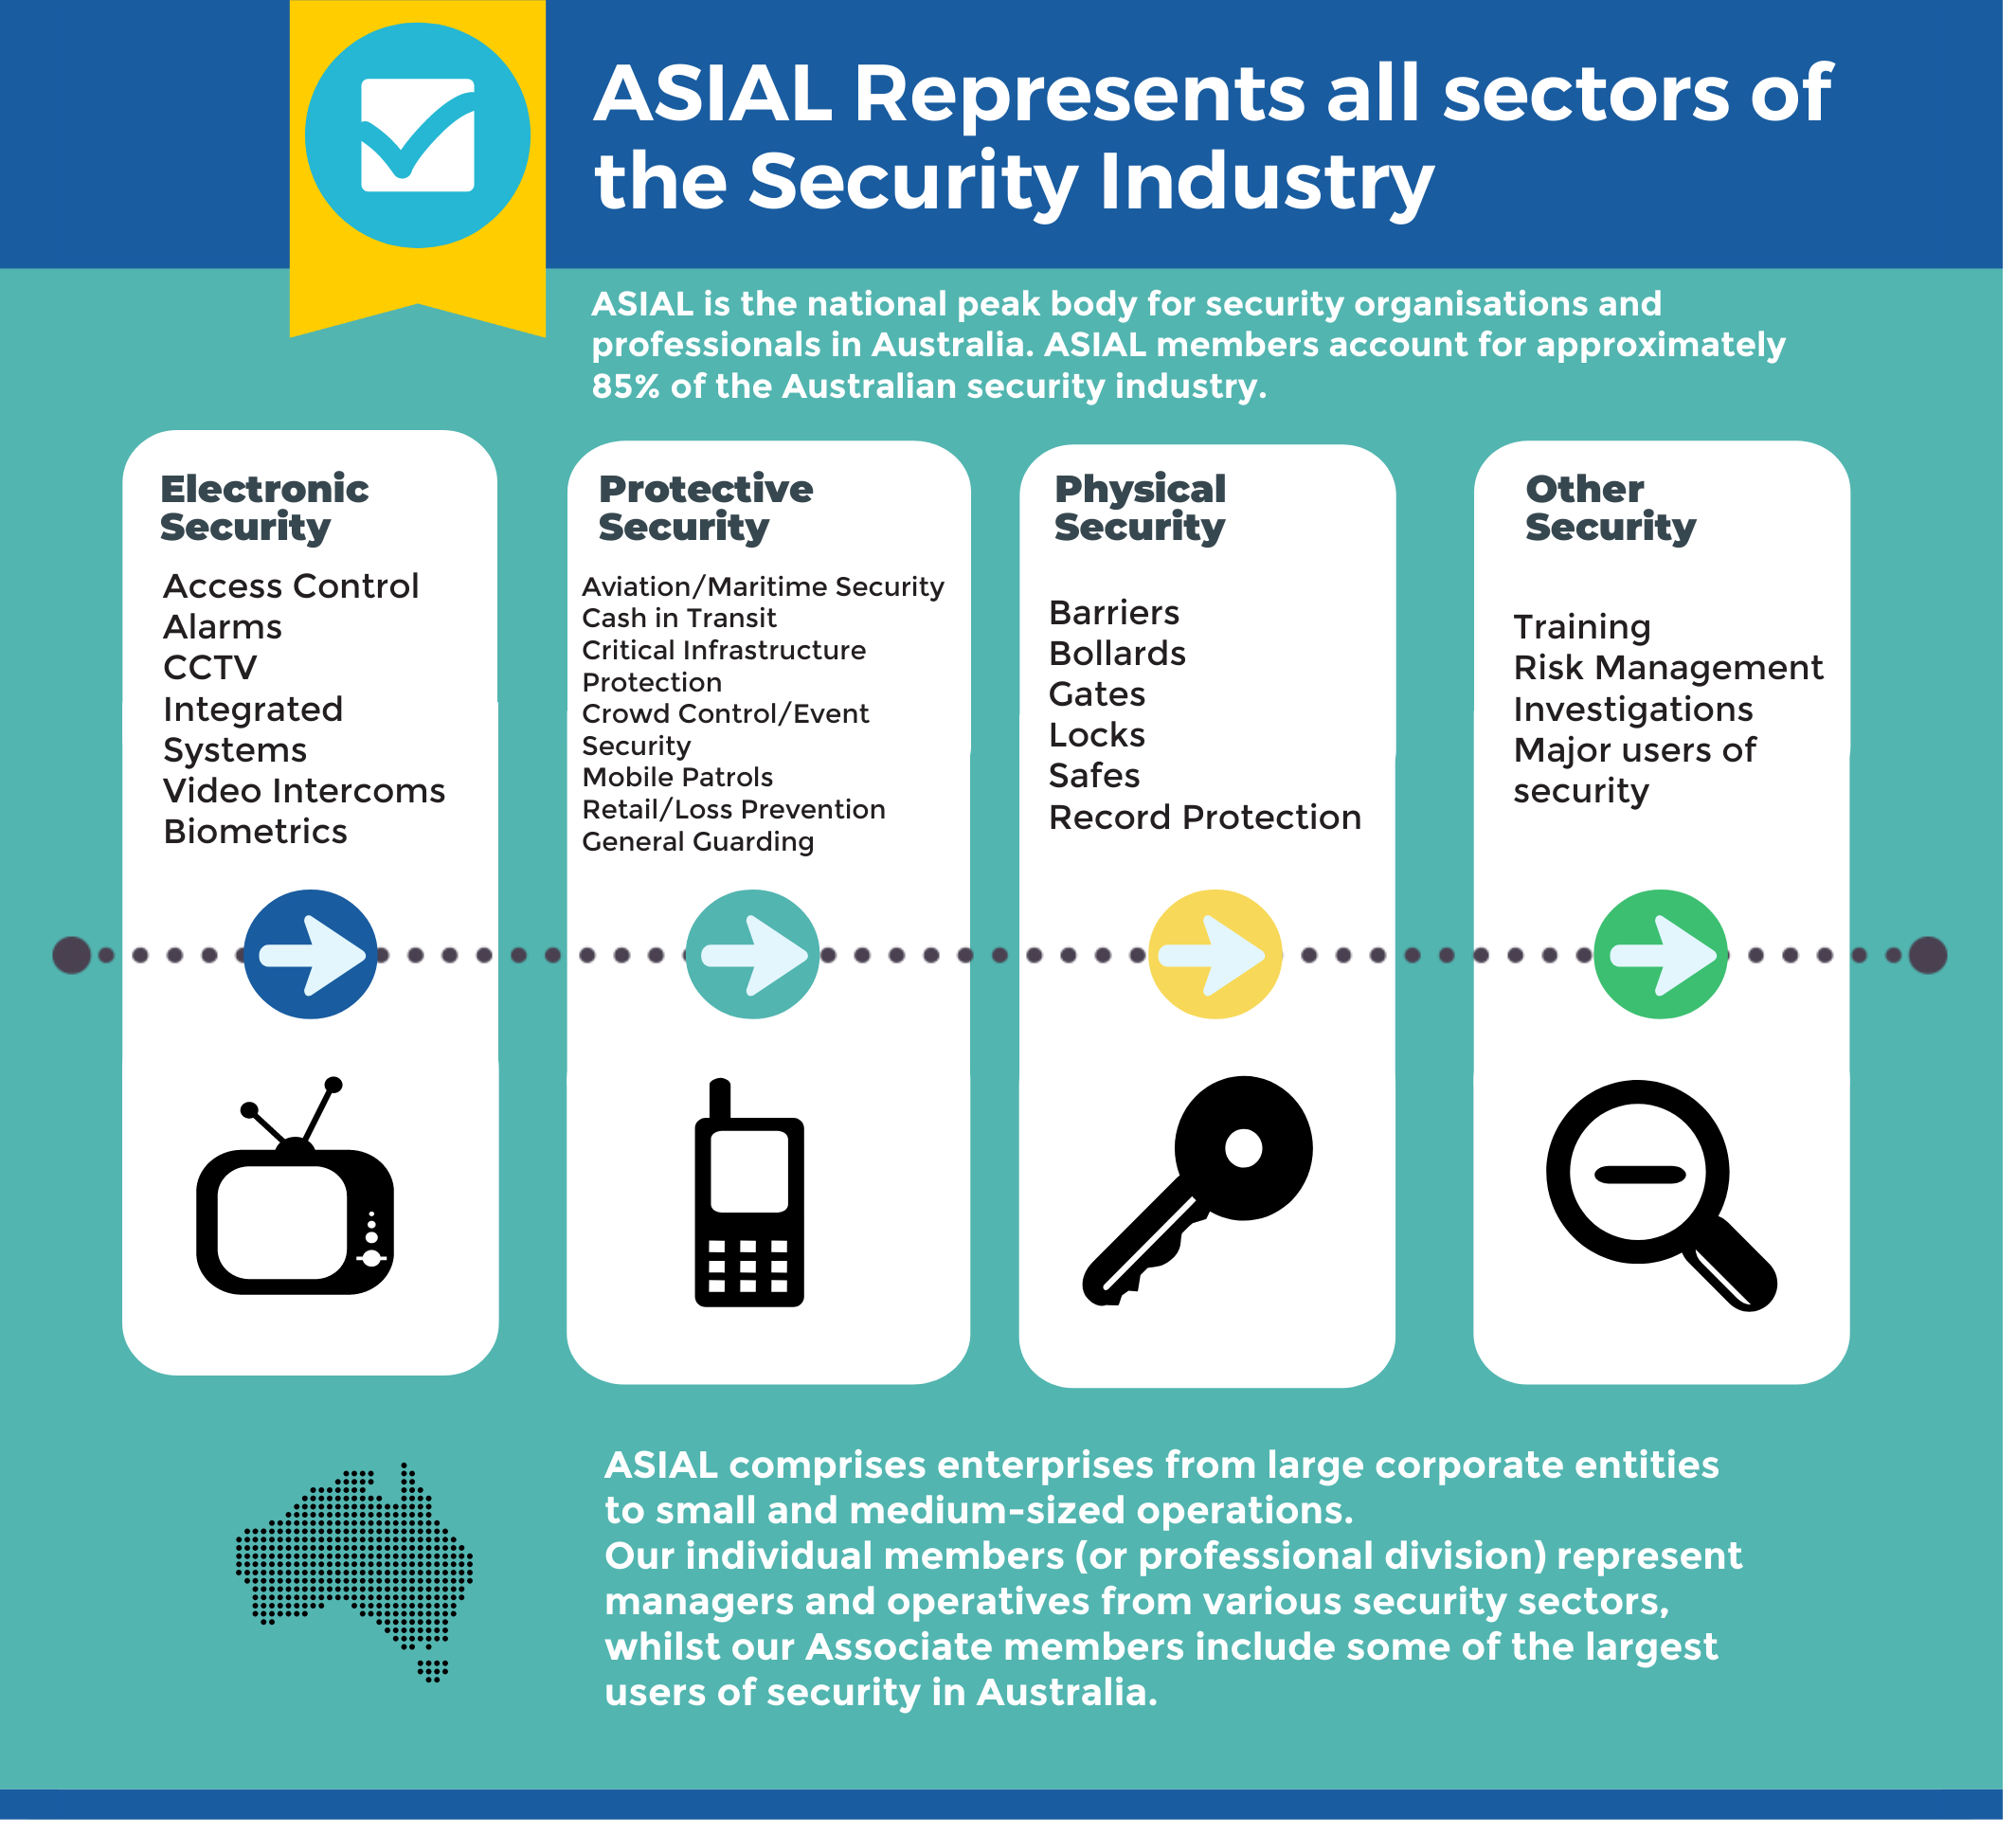 ASIAL represents all sectors of the security industry